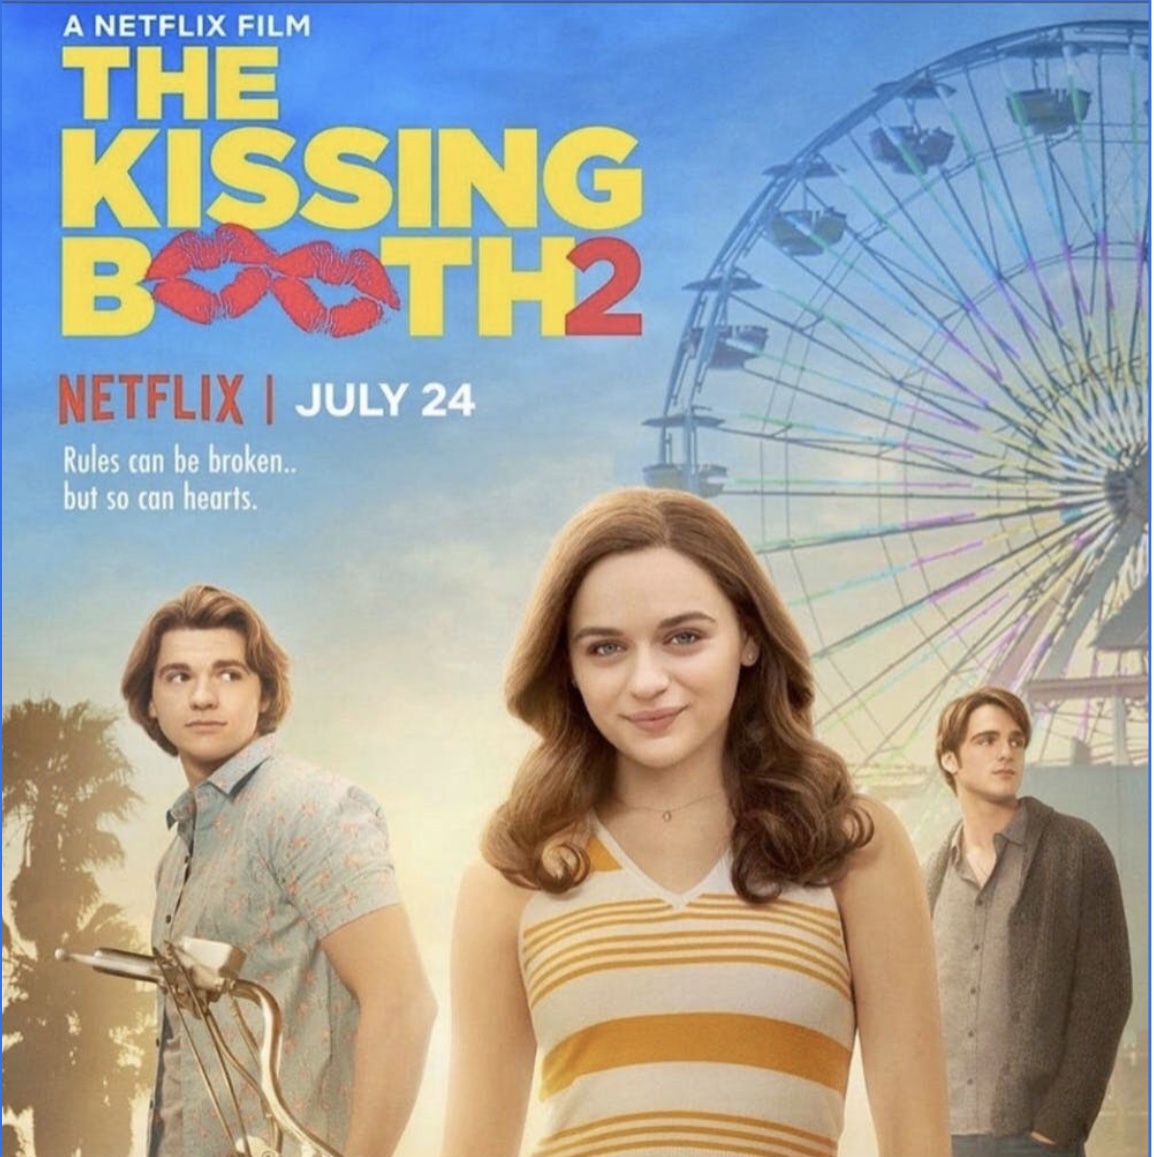 The kissing booth 3 full movie